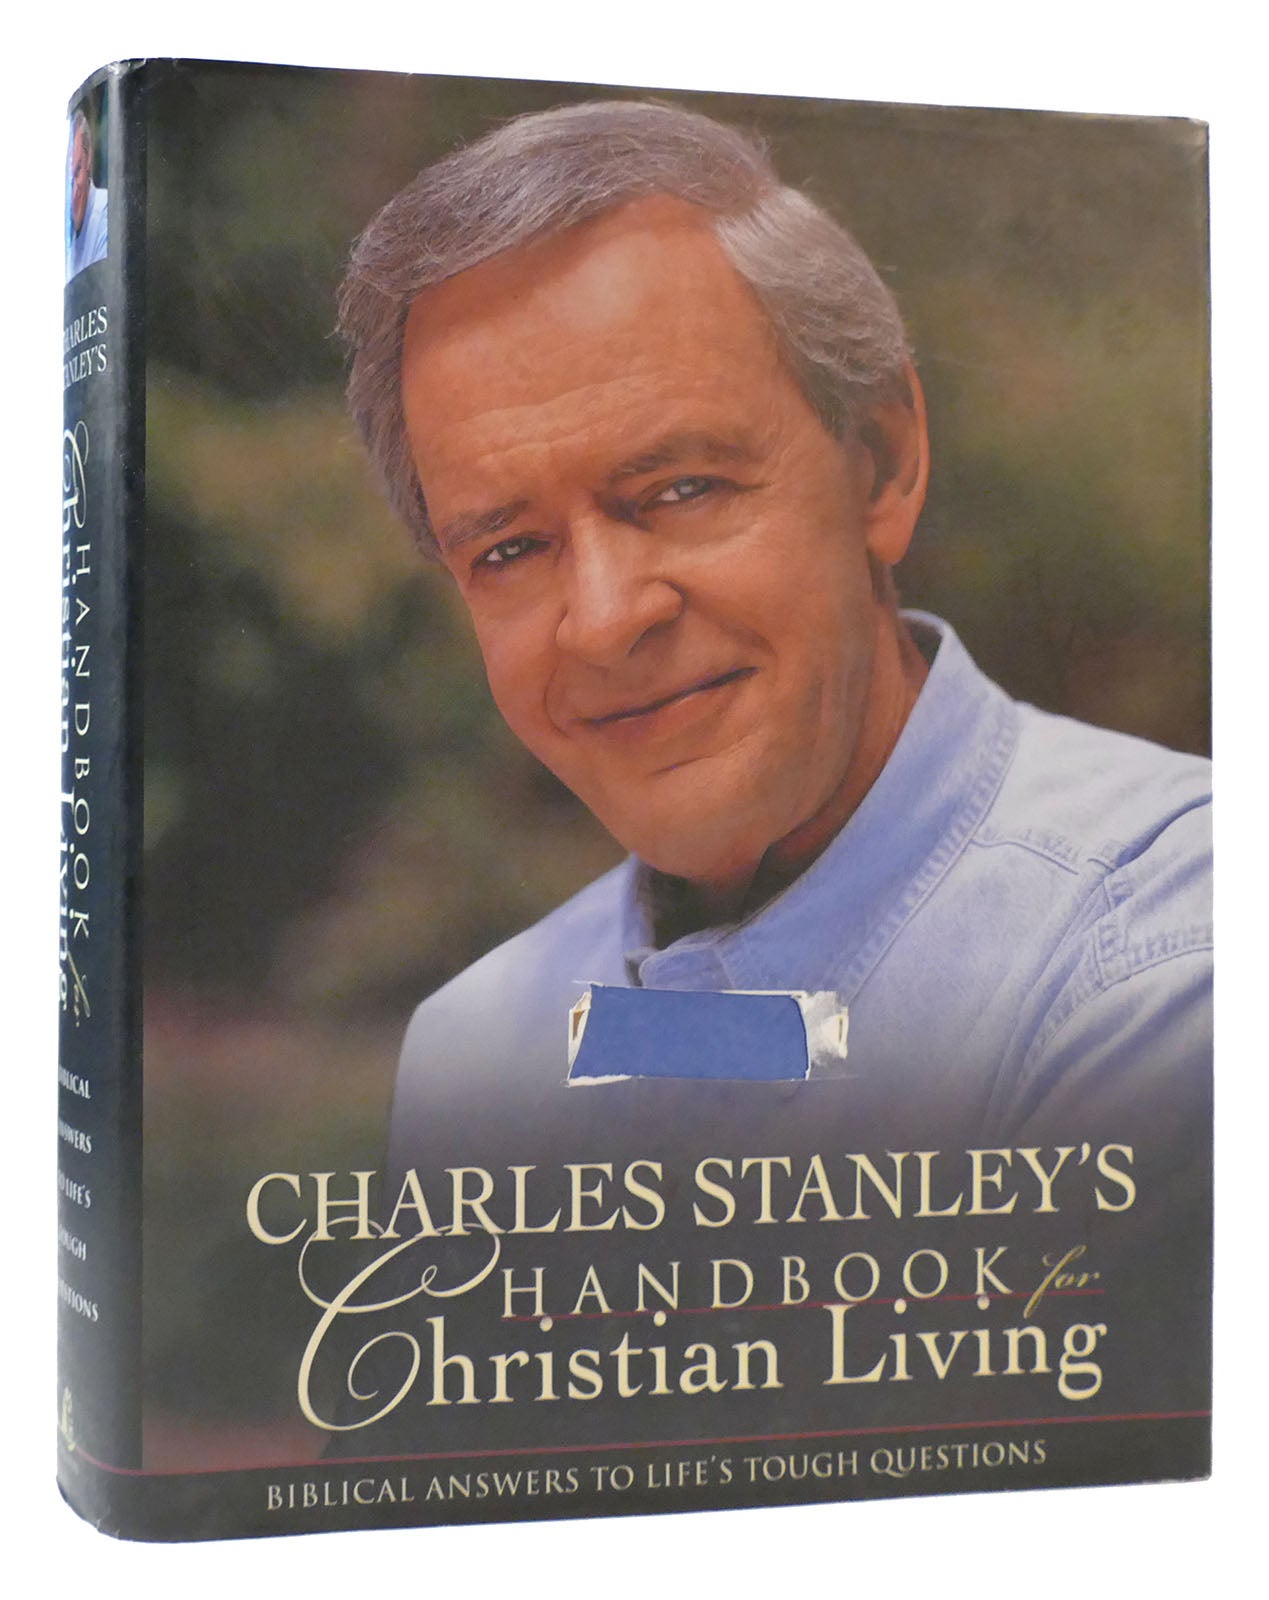 CHARLES STANLEY'S HANDBOOK FOR CHRISTIAN LIVING Biblical Answers to